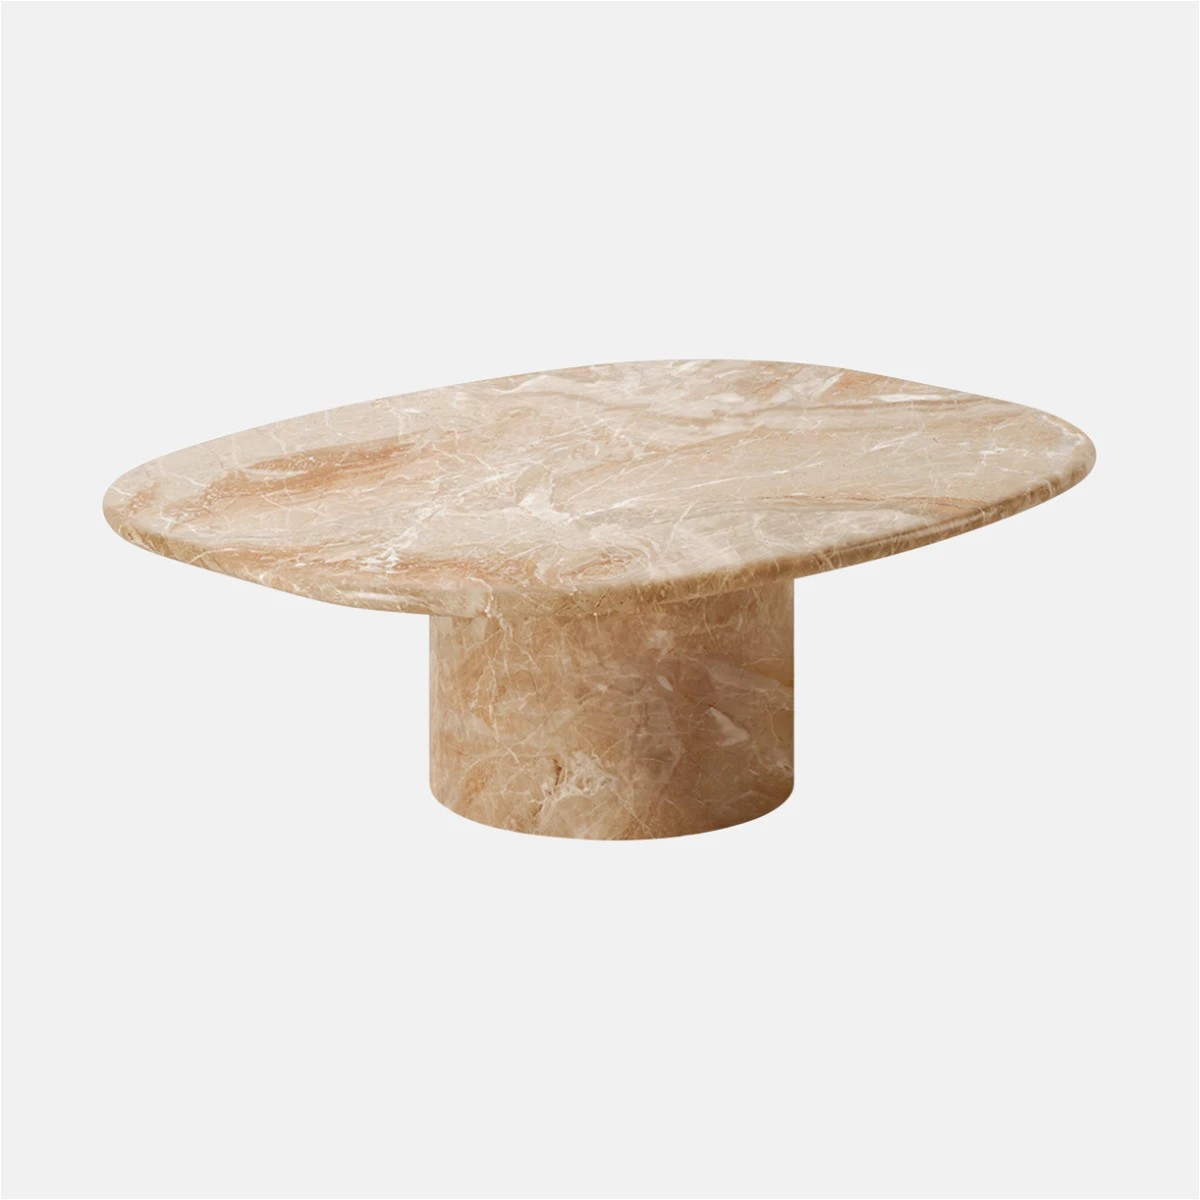 a round marble table on a white background